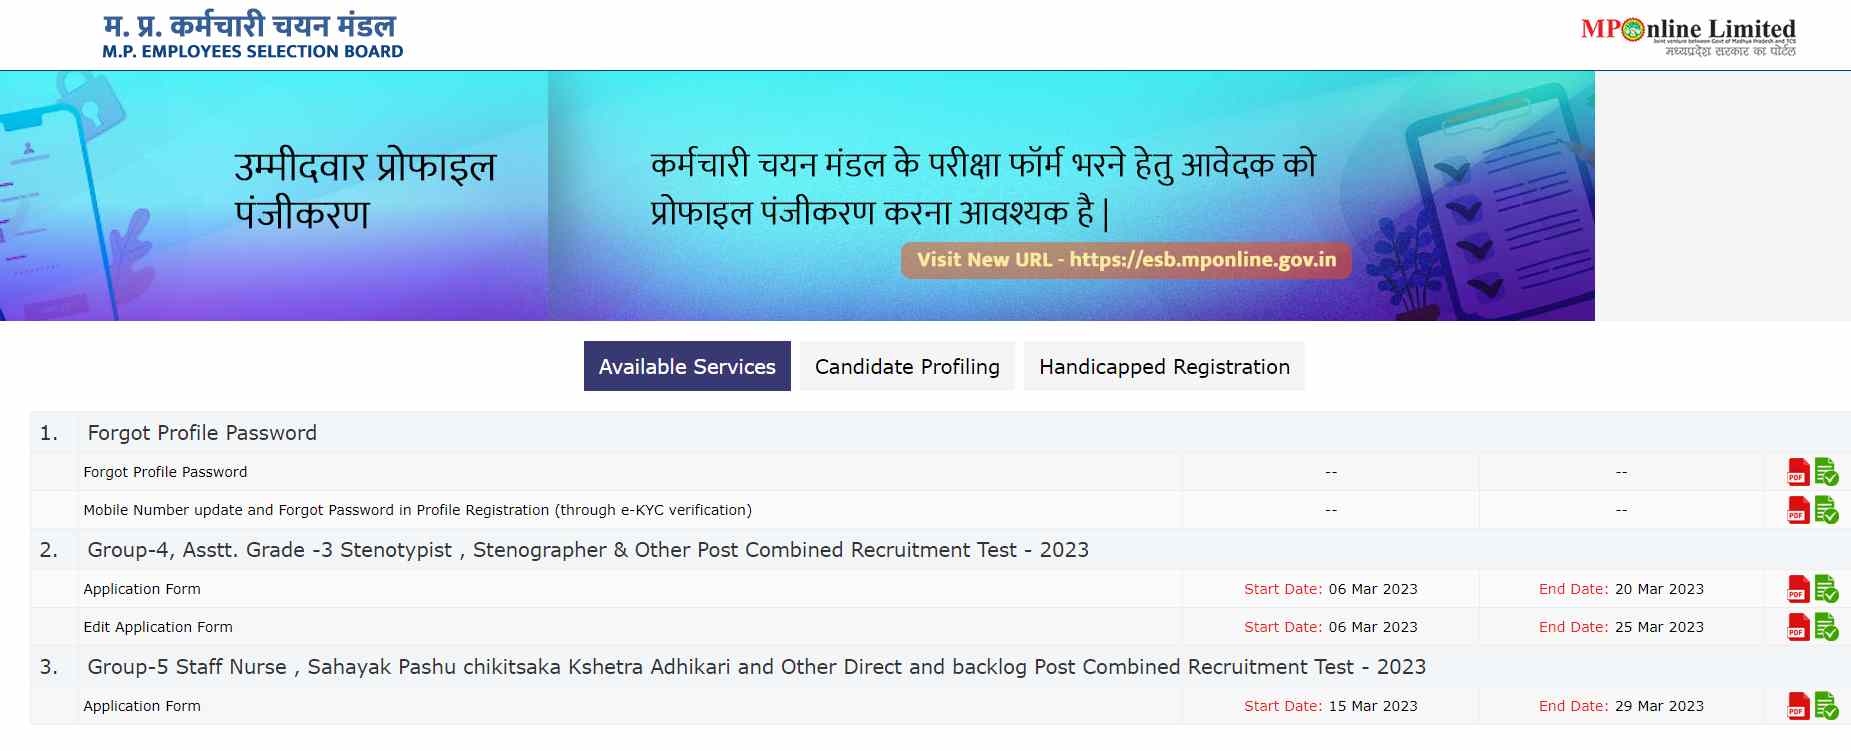 MPPEB Group 5 Eligibility Criteria 2023, Check All Details Here